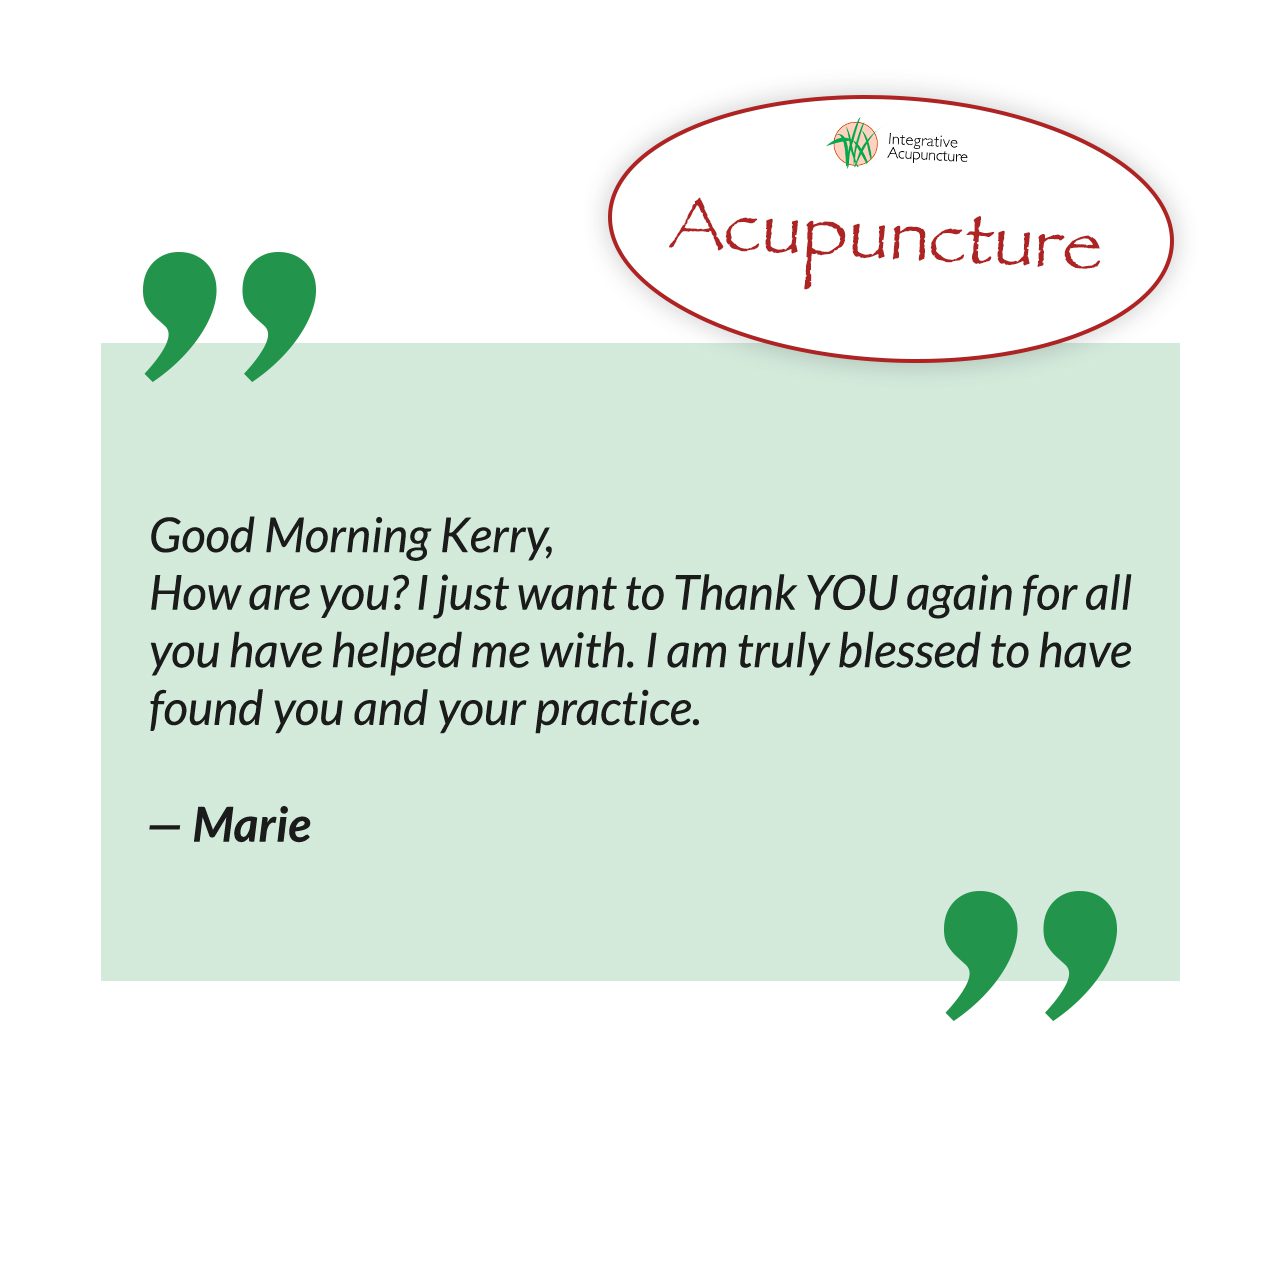 Acupuncture Review